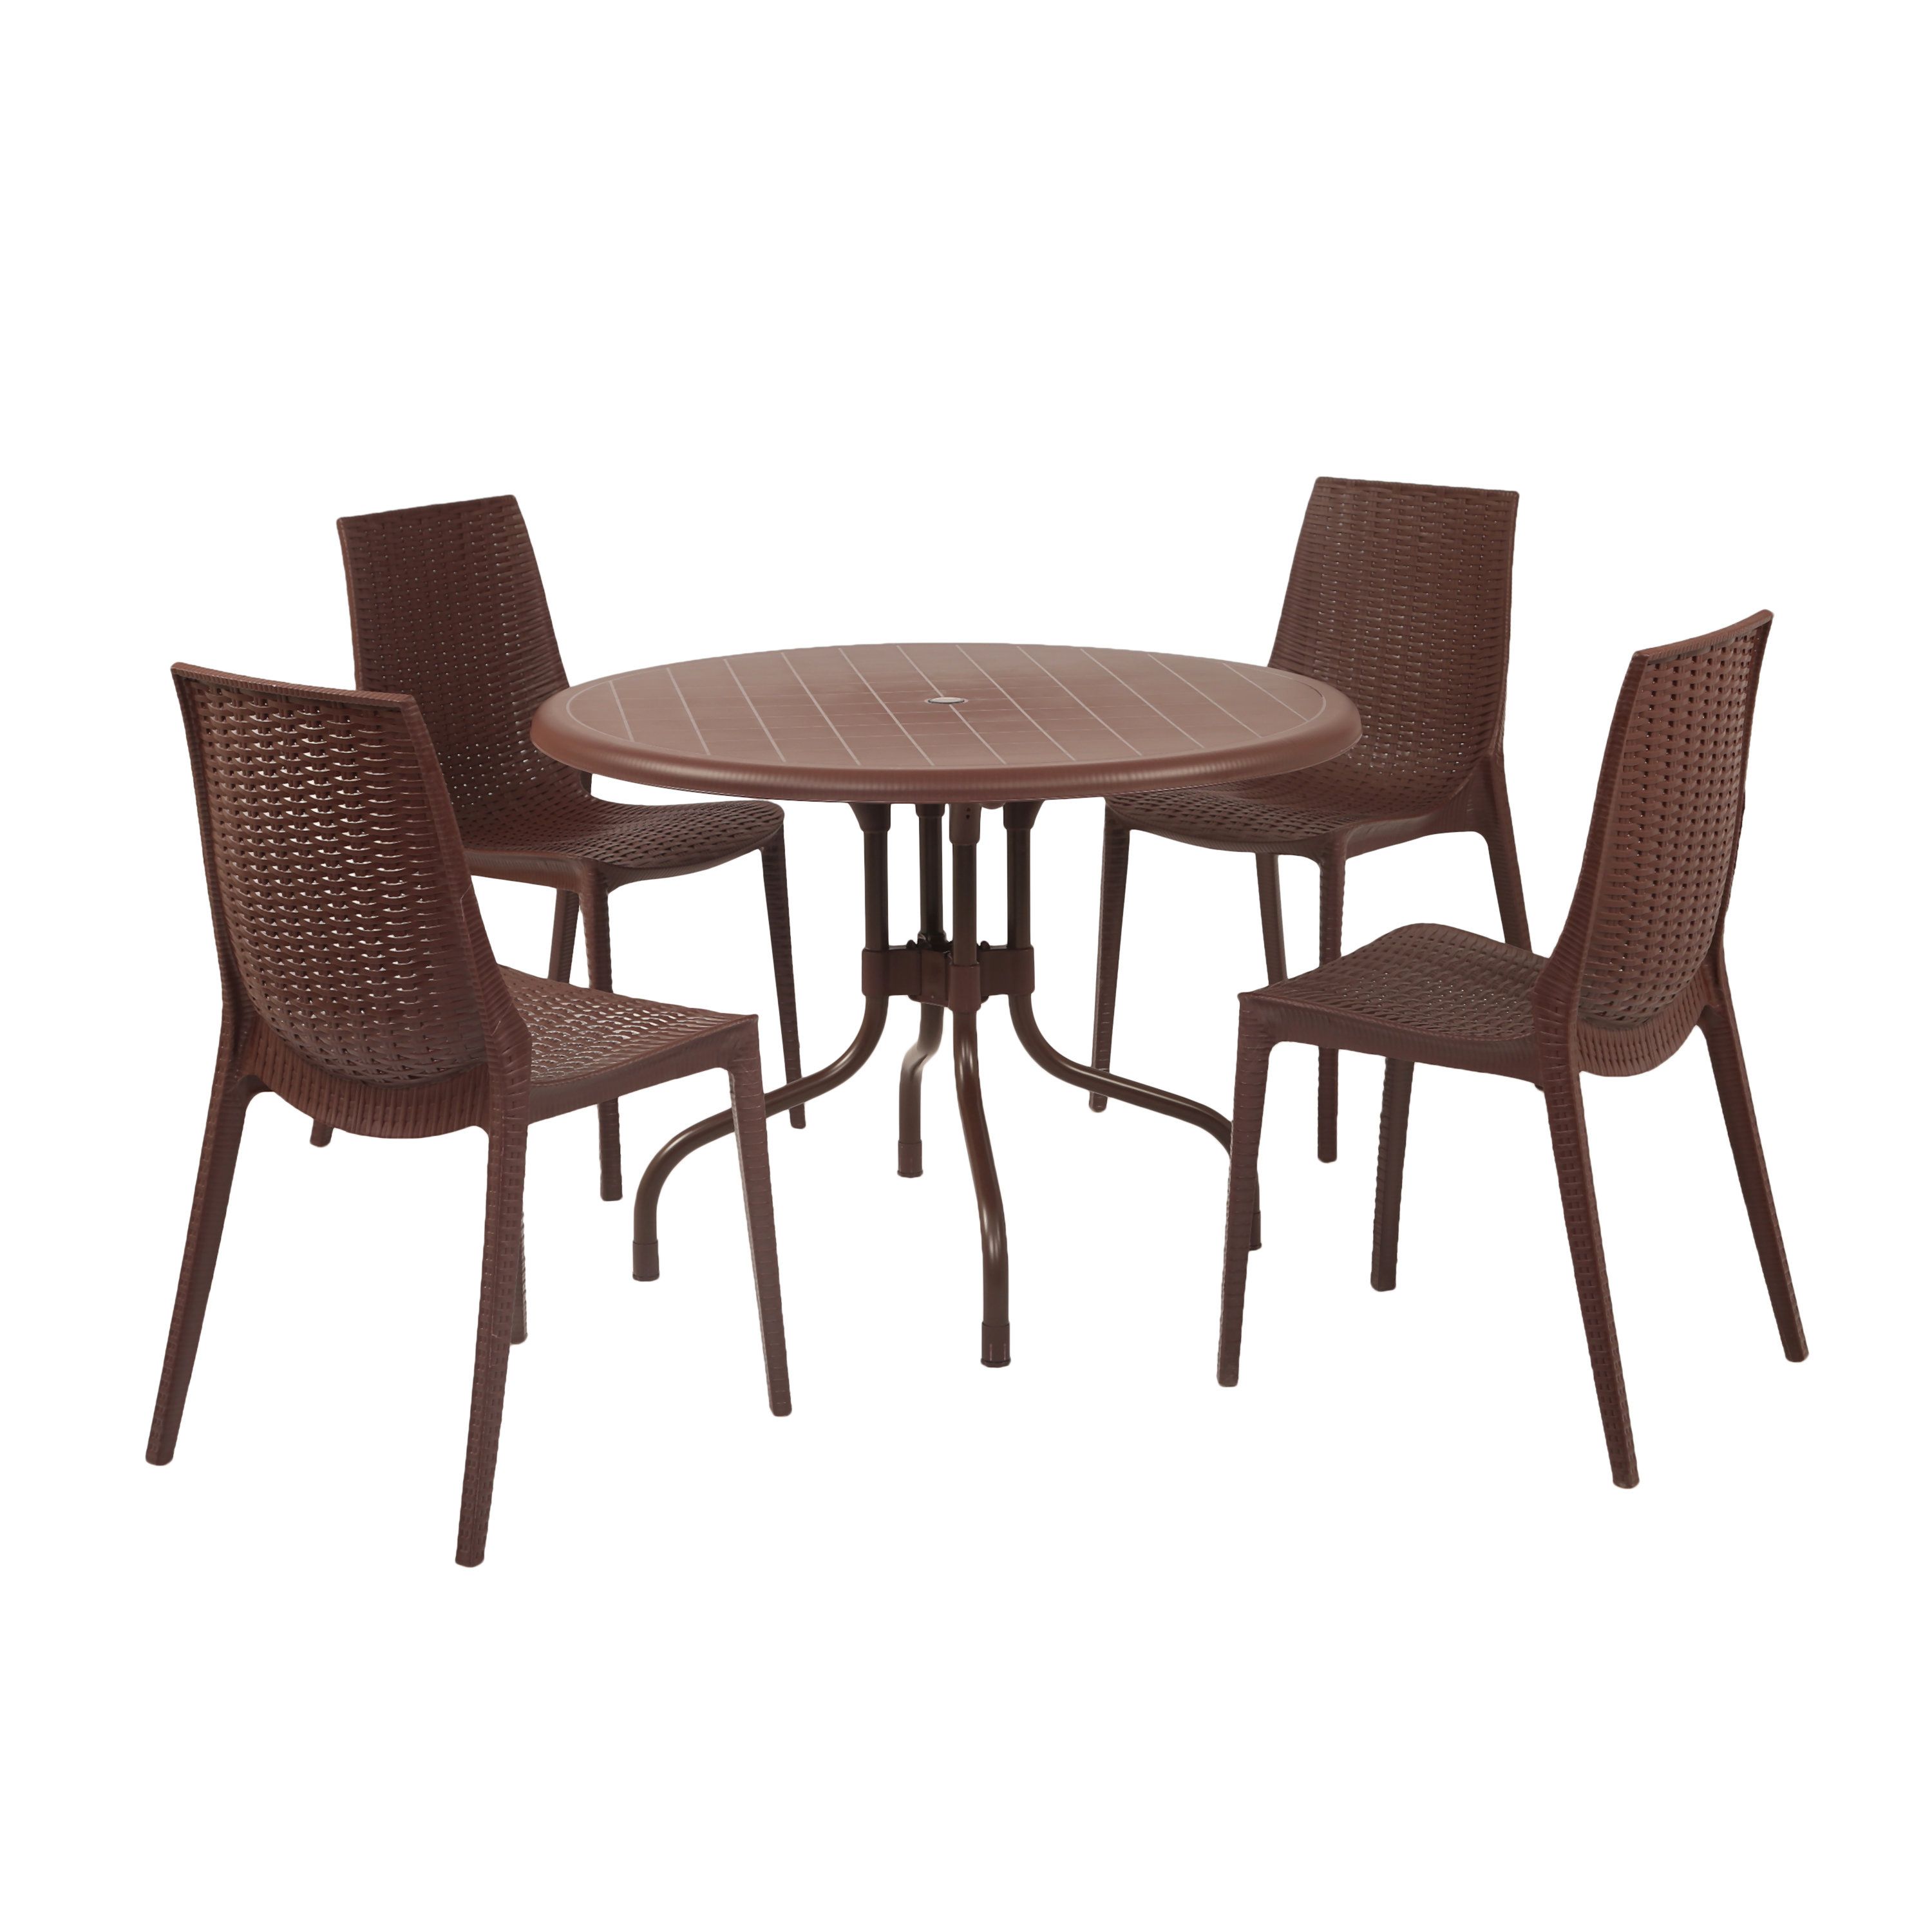 Miskell 5 Piece Dining Sets Regarding Fashionable Miskell Commercial Grade 5 Piece Dining Set (View 2 of 20)